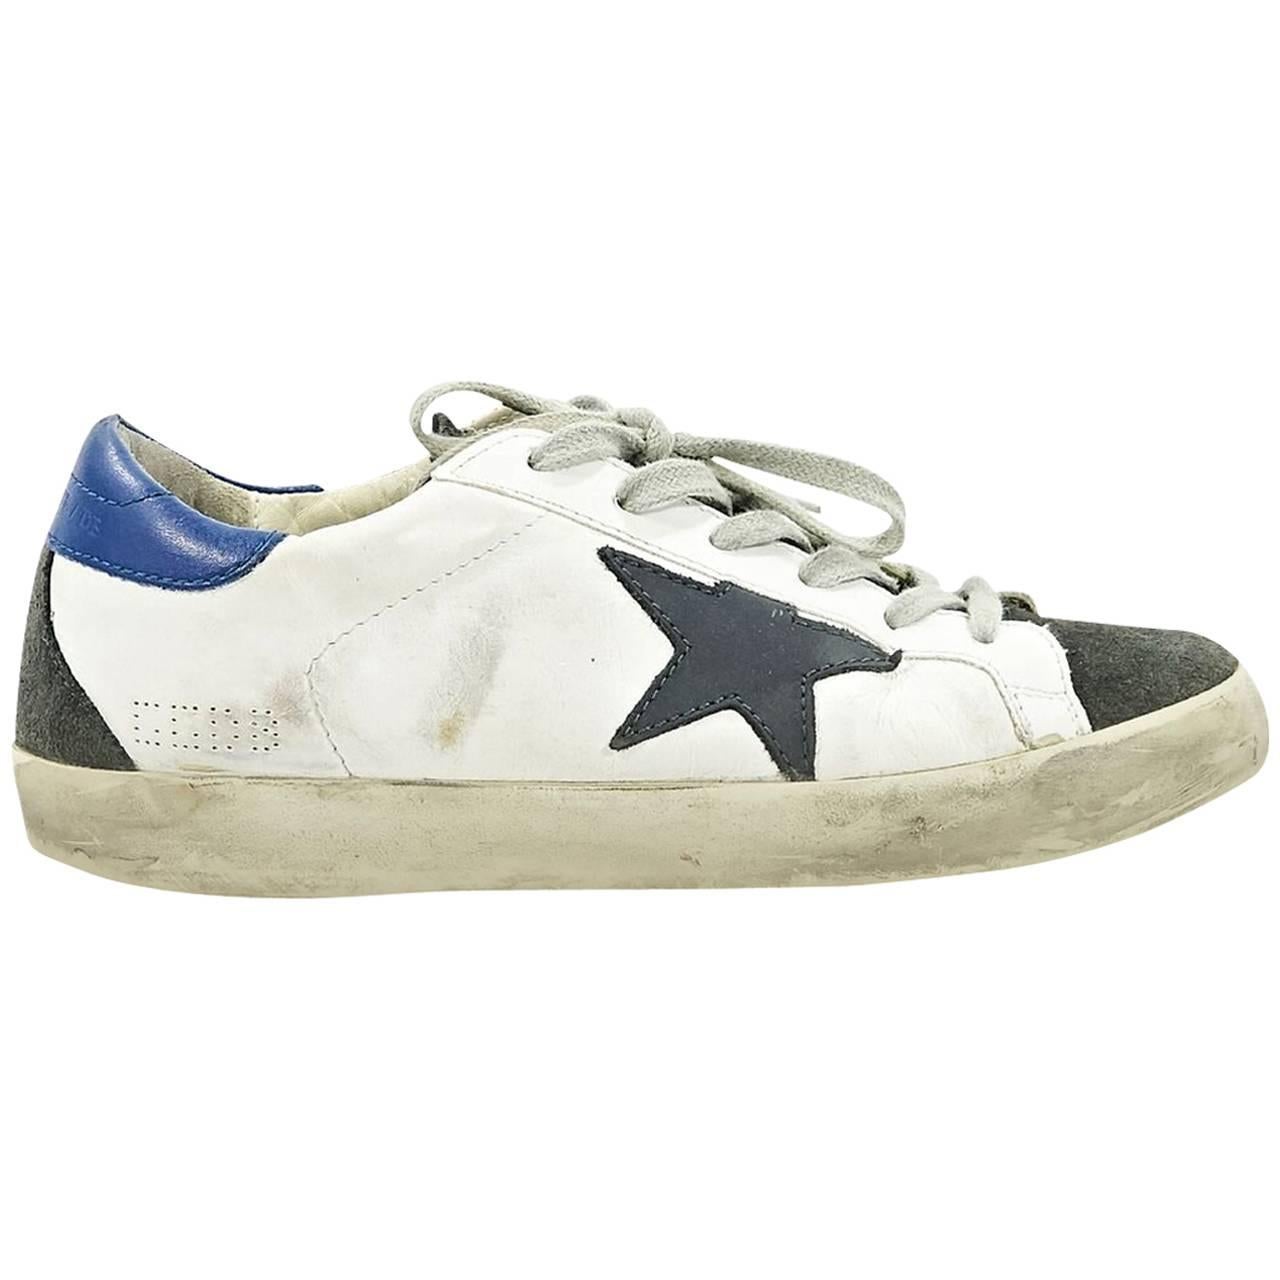 Multicolor Golden Goose Deluxe Brand Leather Sneakers